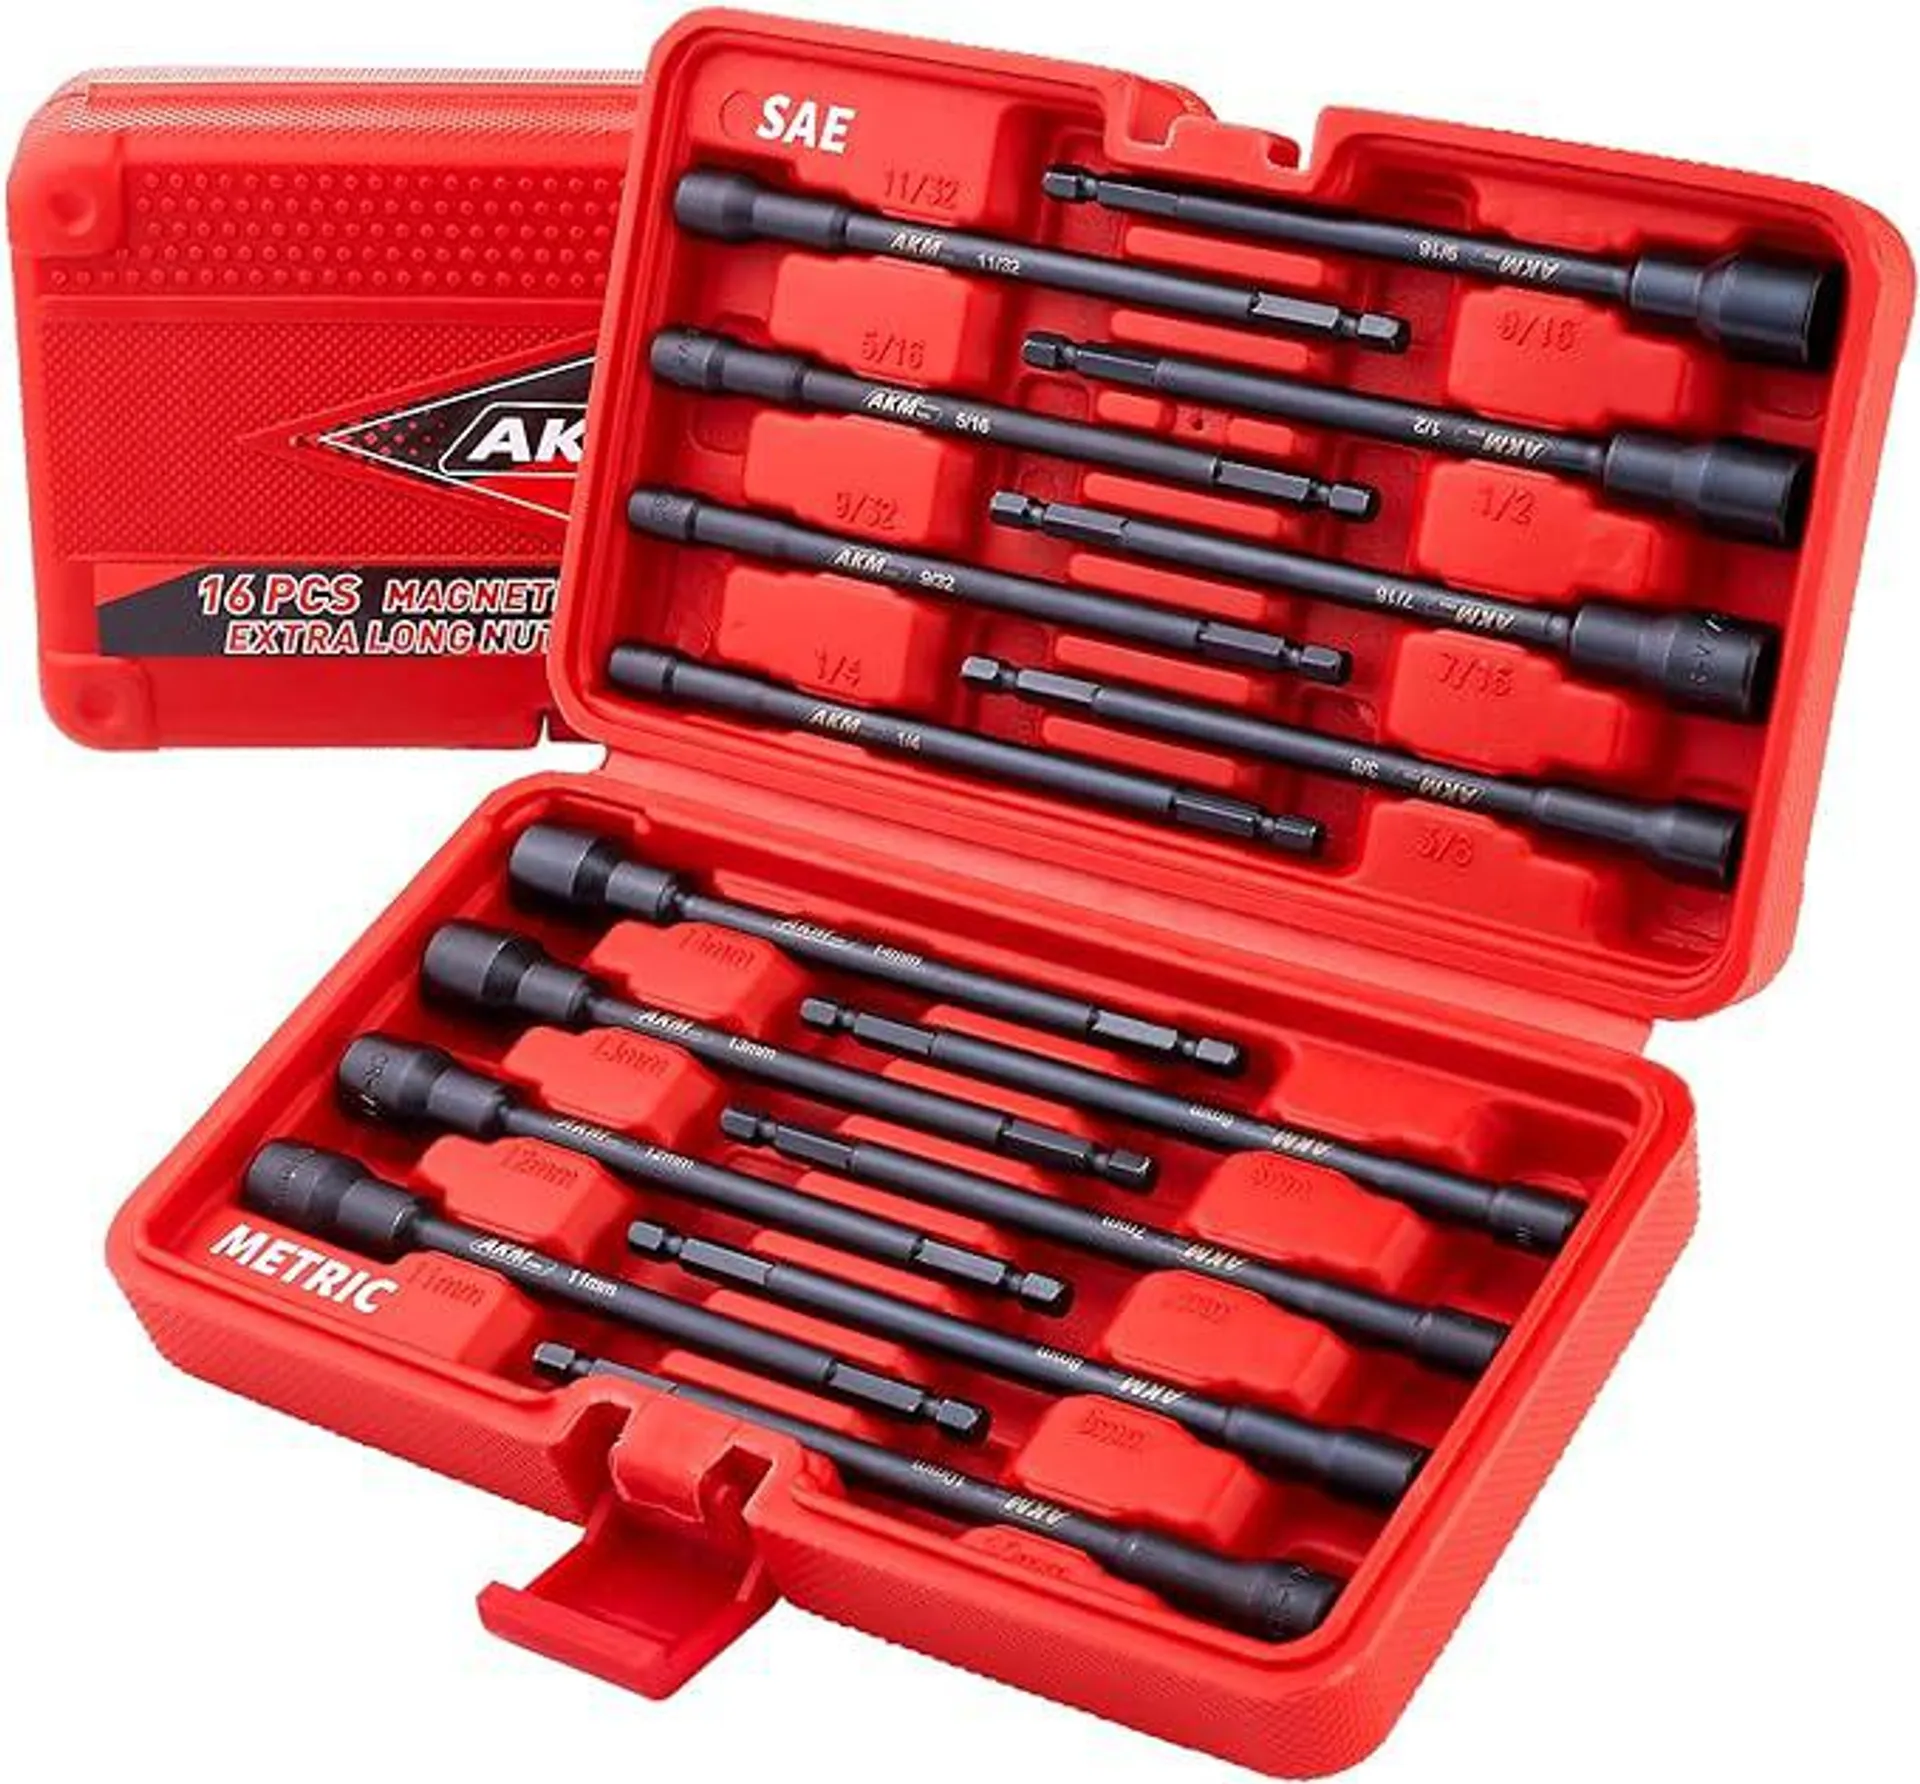 16 PC Magnetic Nut Driver Set, 6 Inches | 1/4 Inch Hex Shank | SAE & Metric | Cr-V Steel